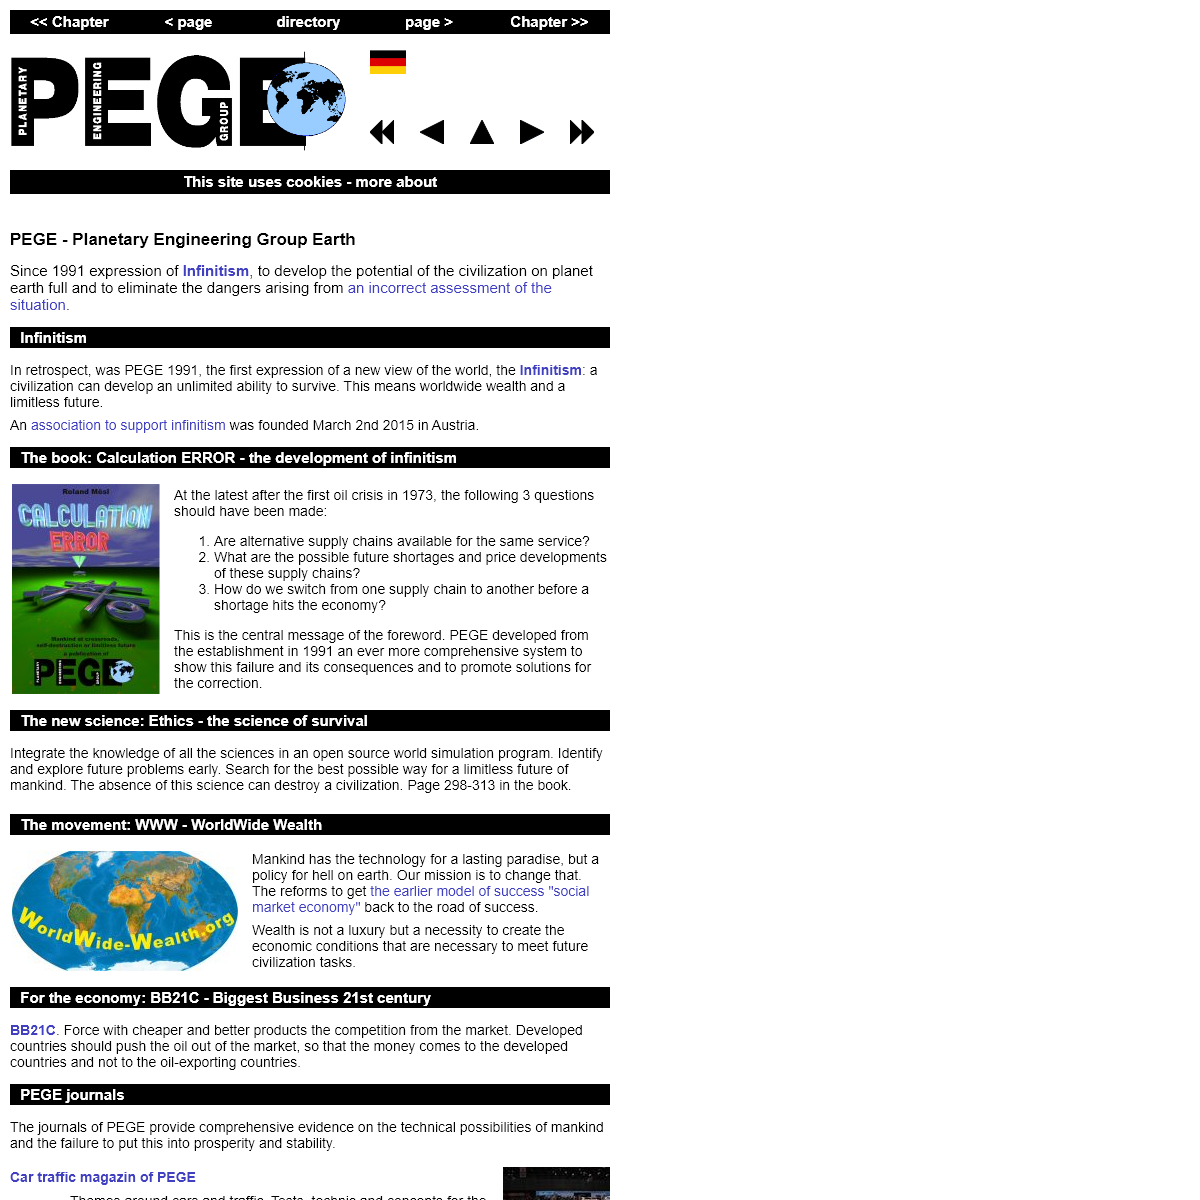 A complete backup of pege.org